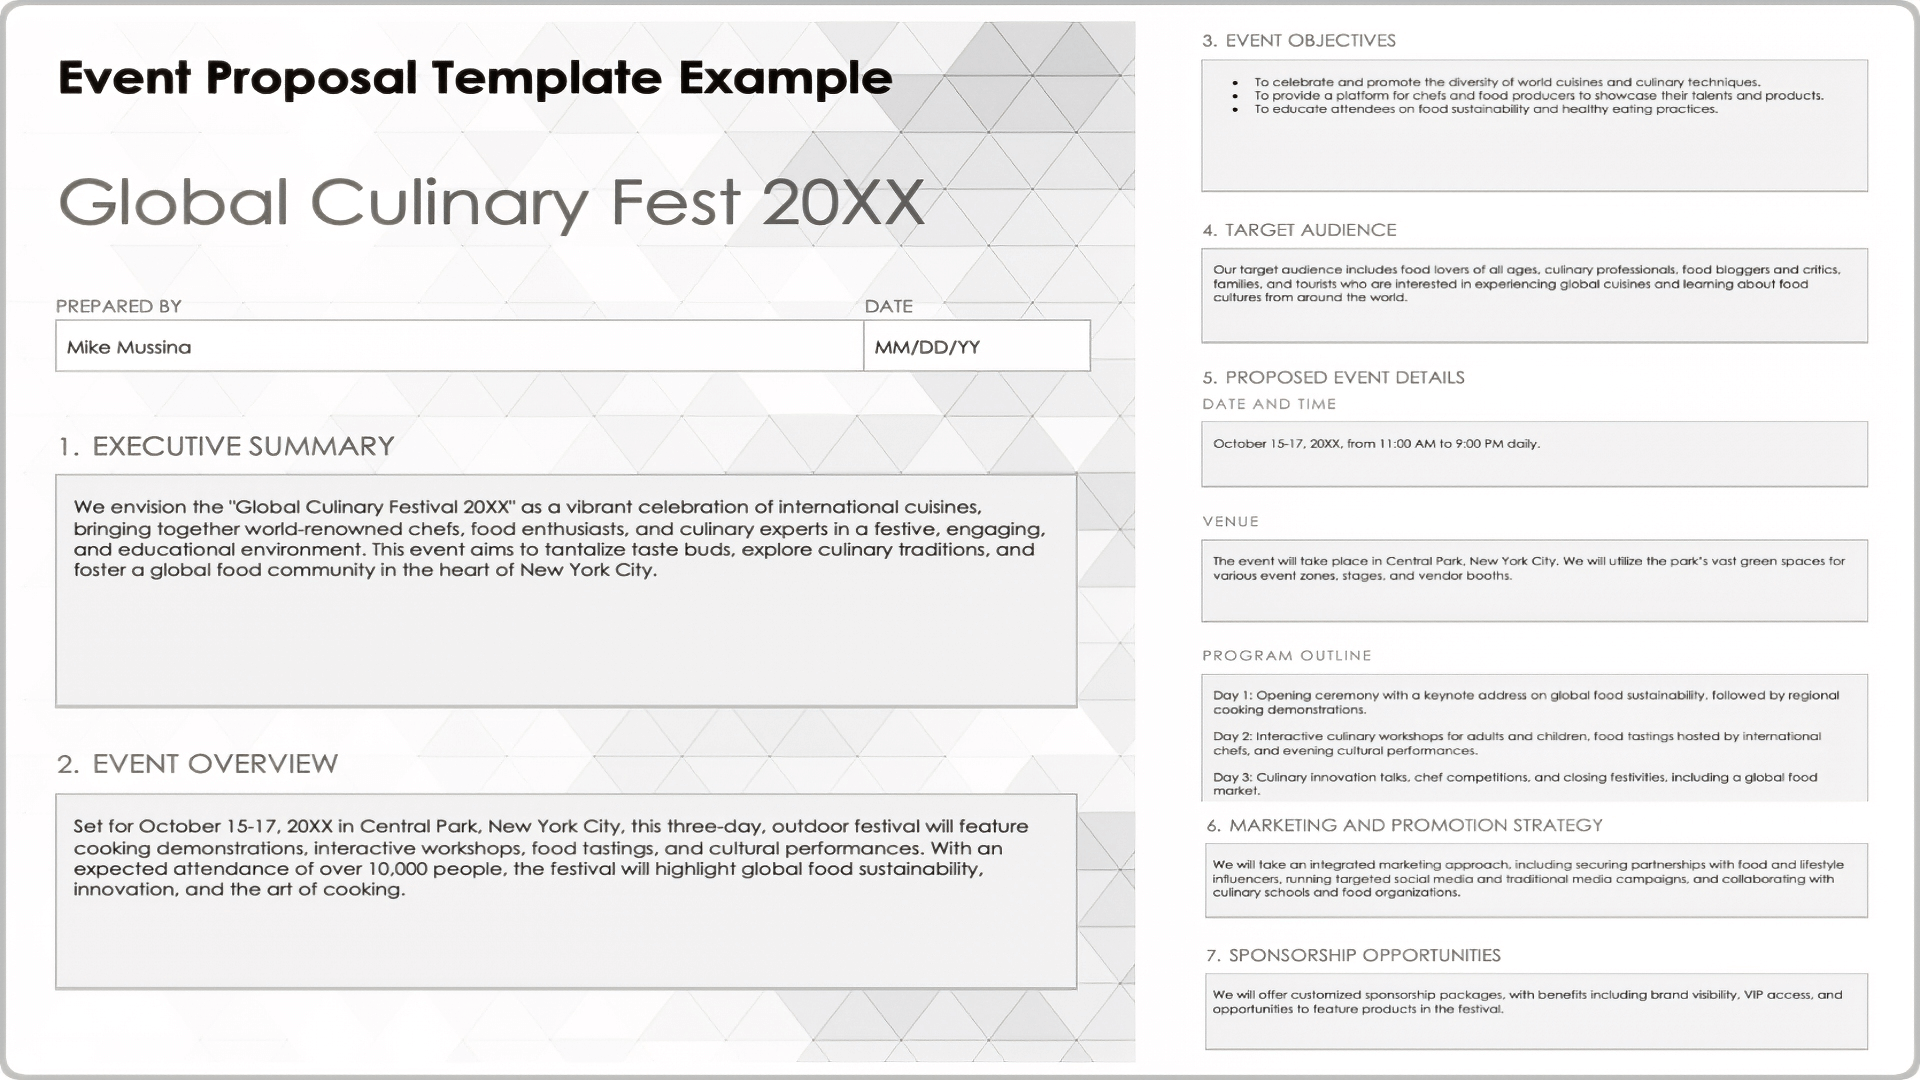 Event Proposal Template Example